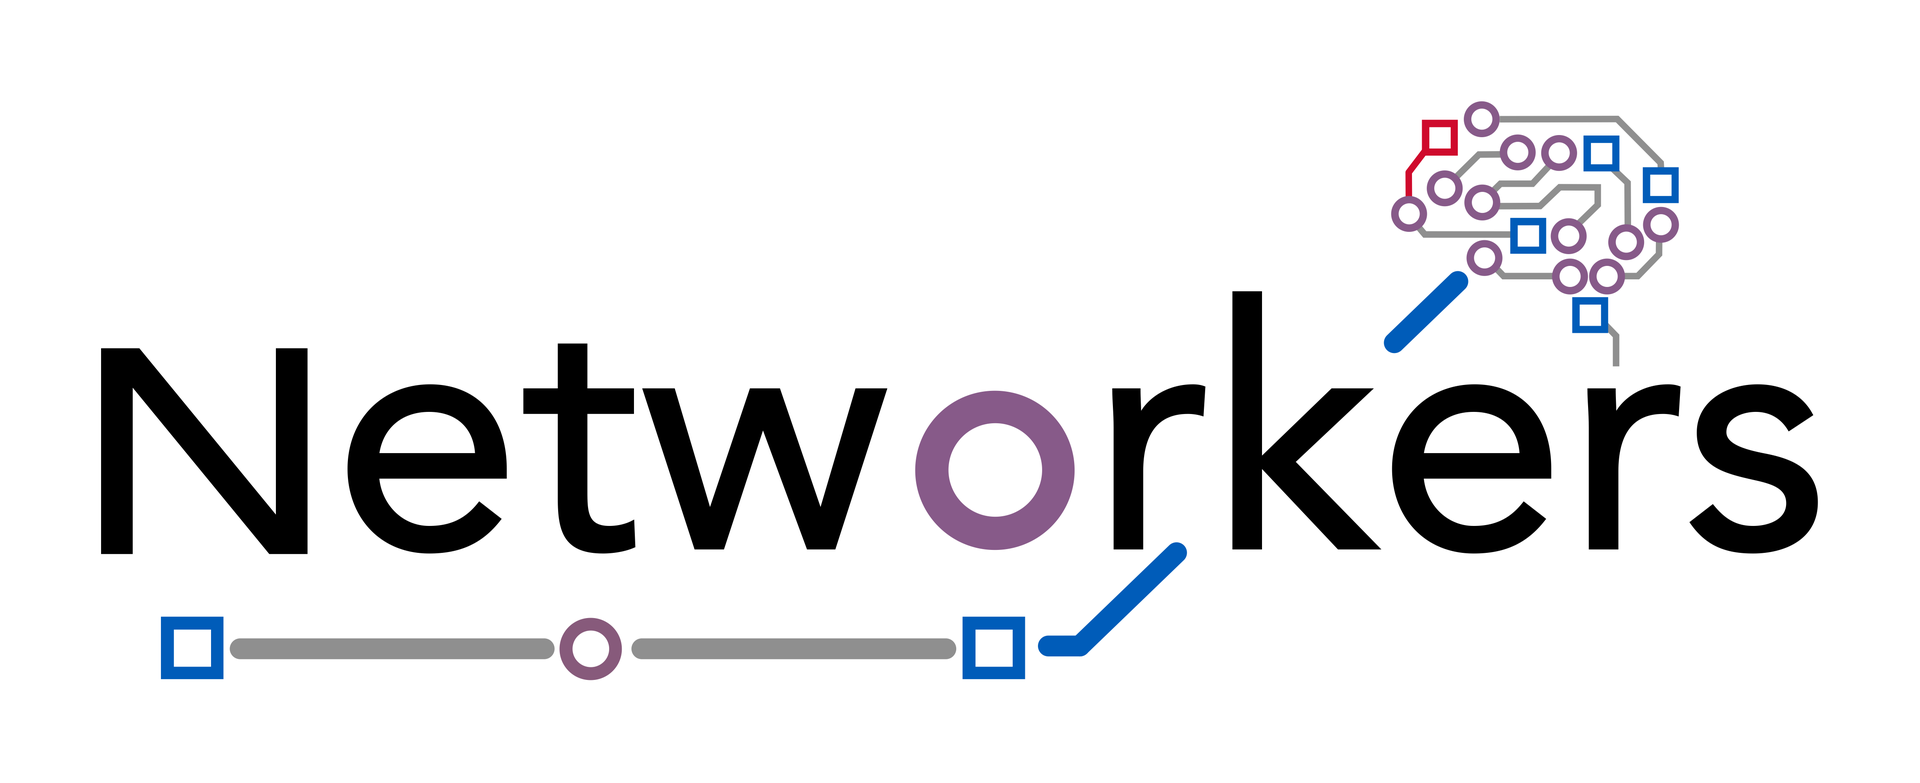 NETWORKERS TECH